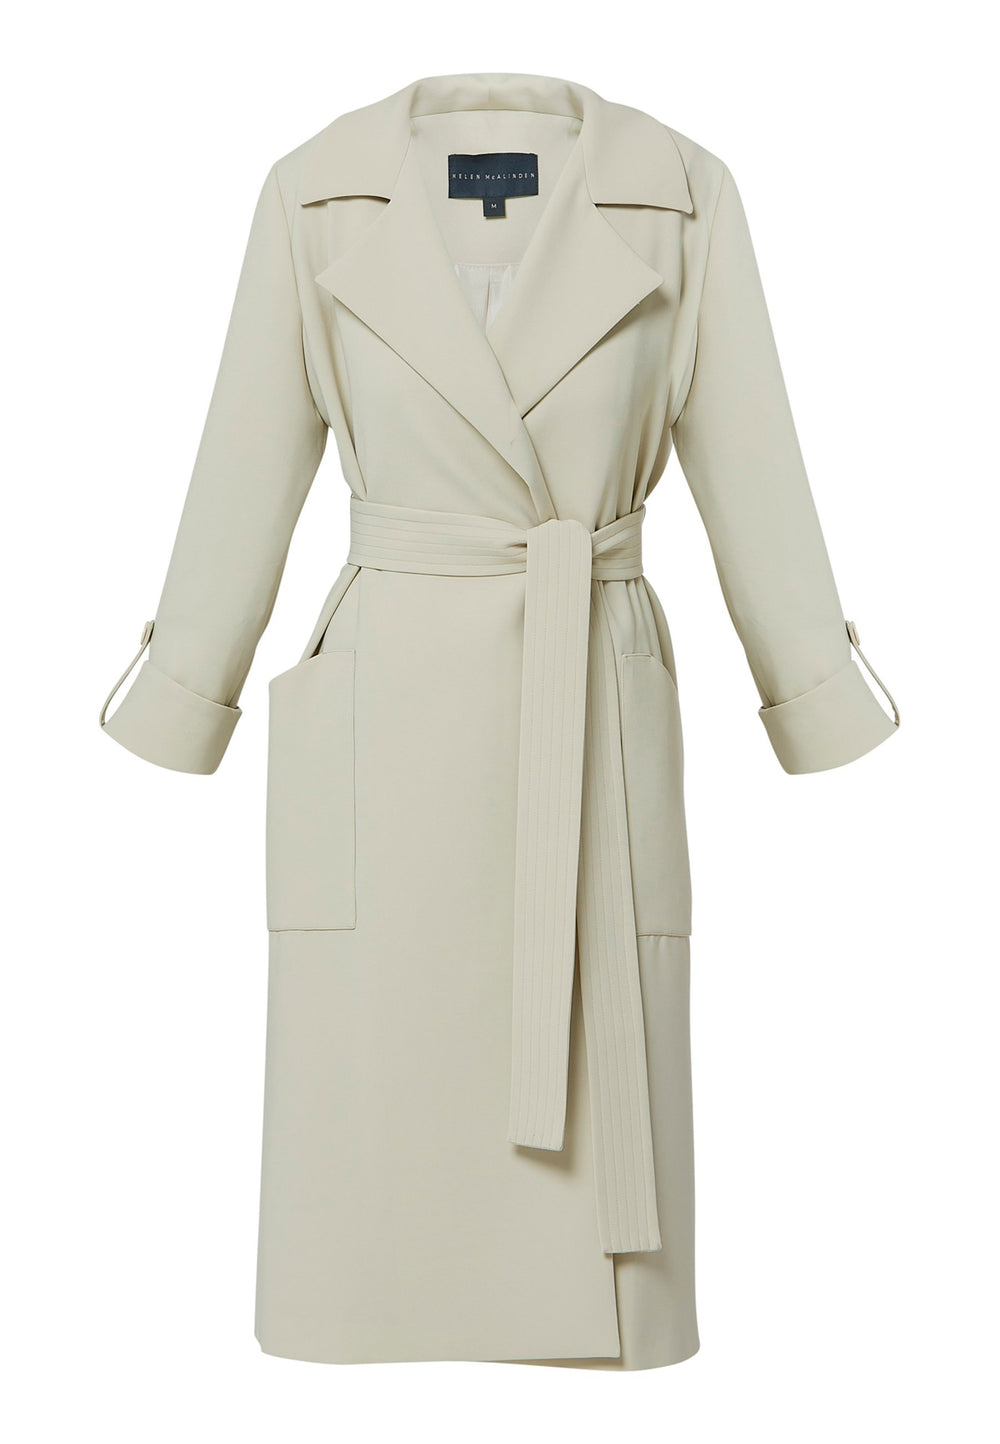 Lydiah, stone trench coat in a fluid satin back crepe. This coat features a relaxed, flowing silhouette, a self-tie belt, and front pockets. The design includes buttoned cuffs and a wide lapel. Pair with coordinating trouser for a chic monochromatic look.